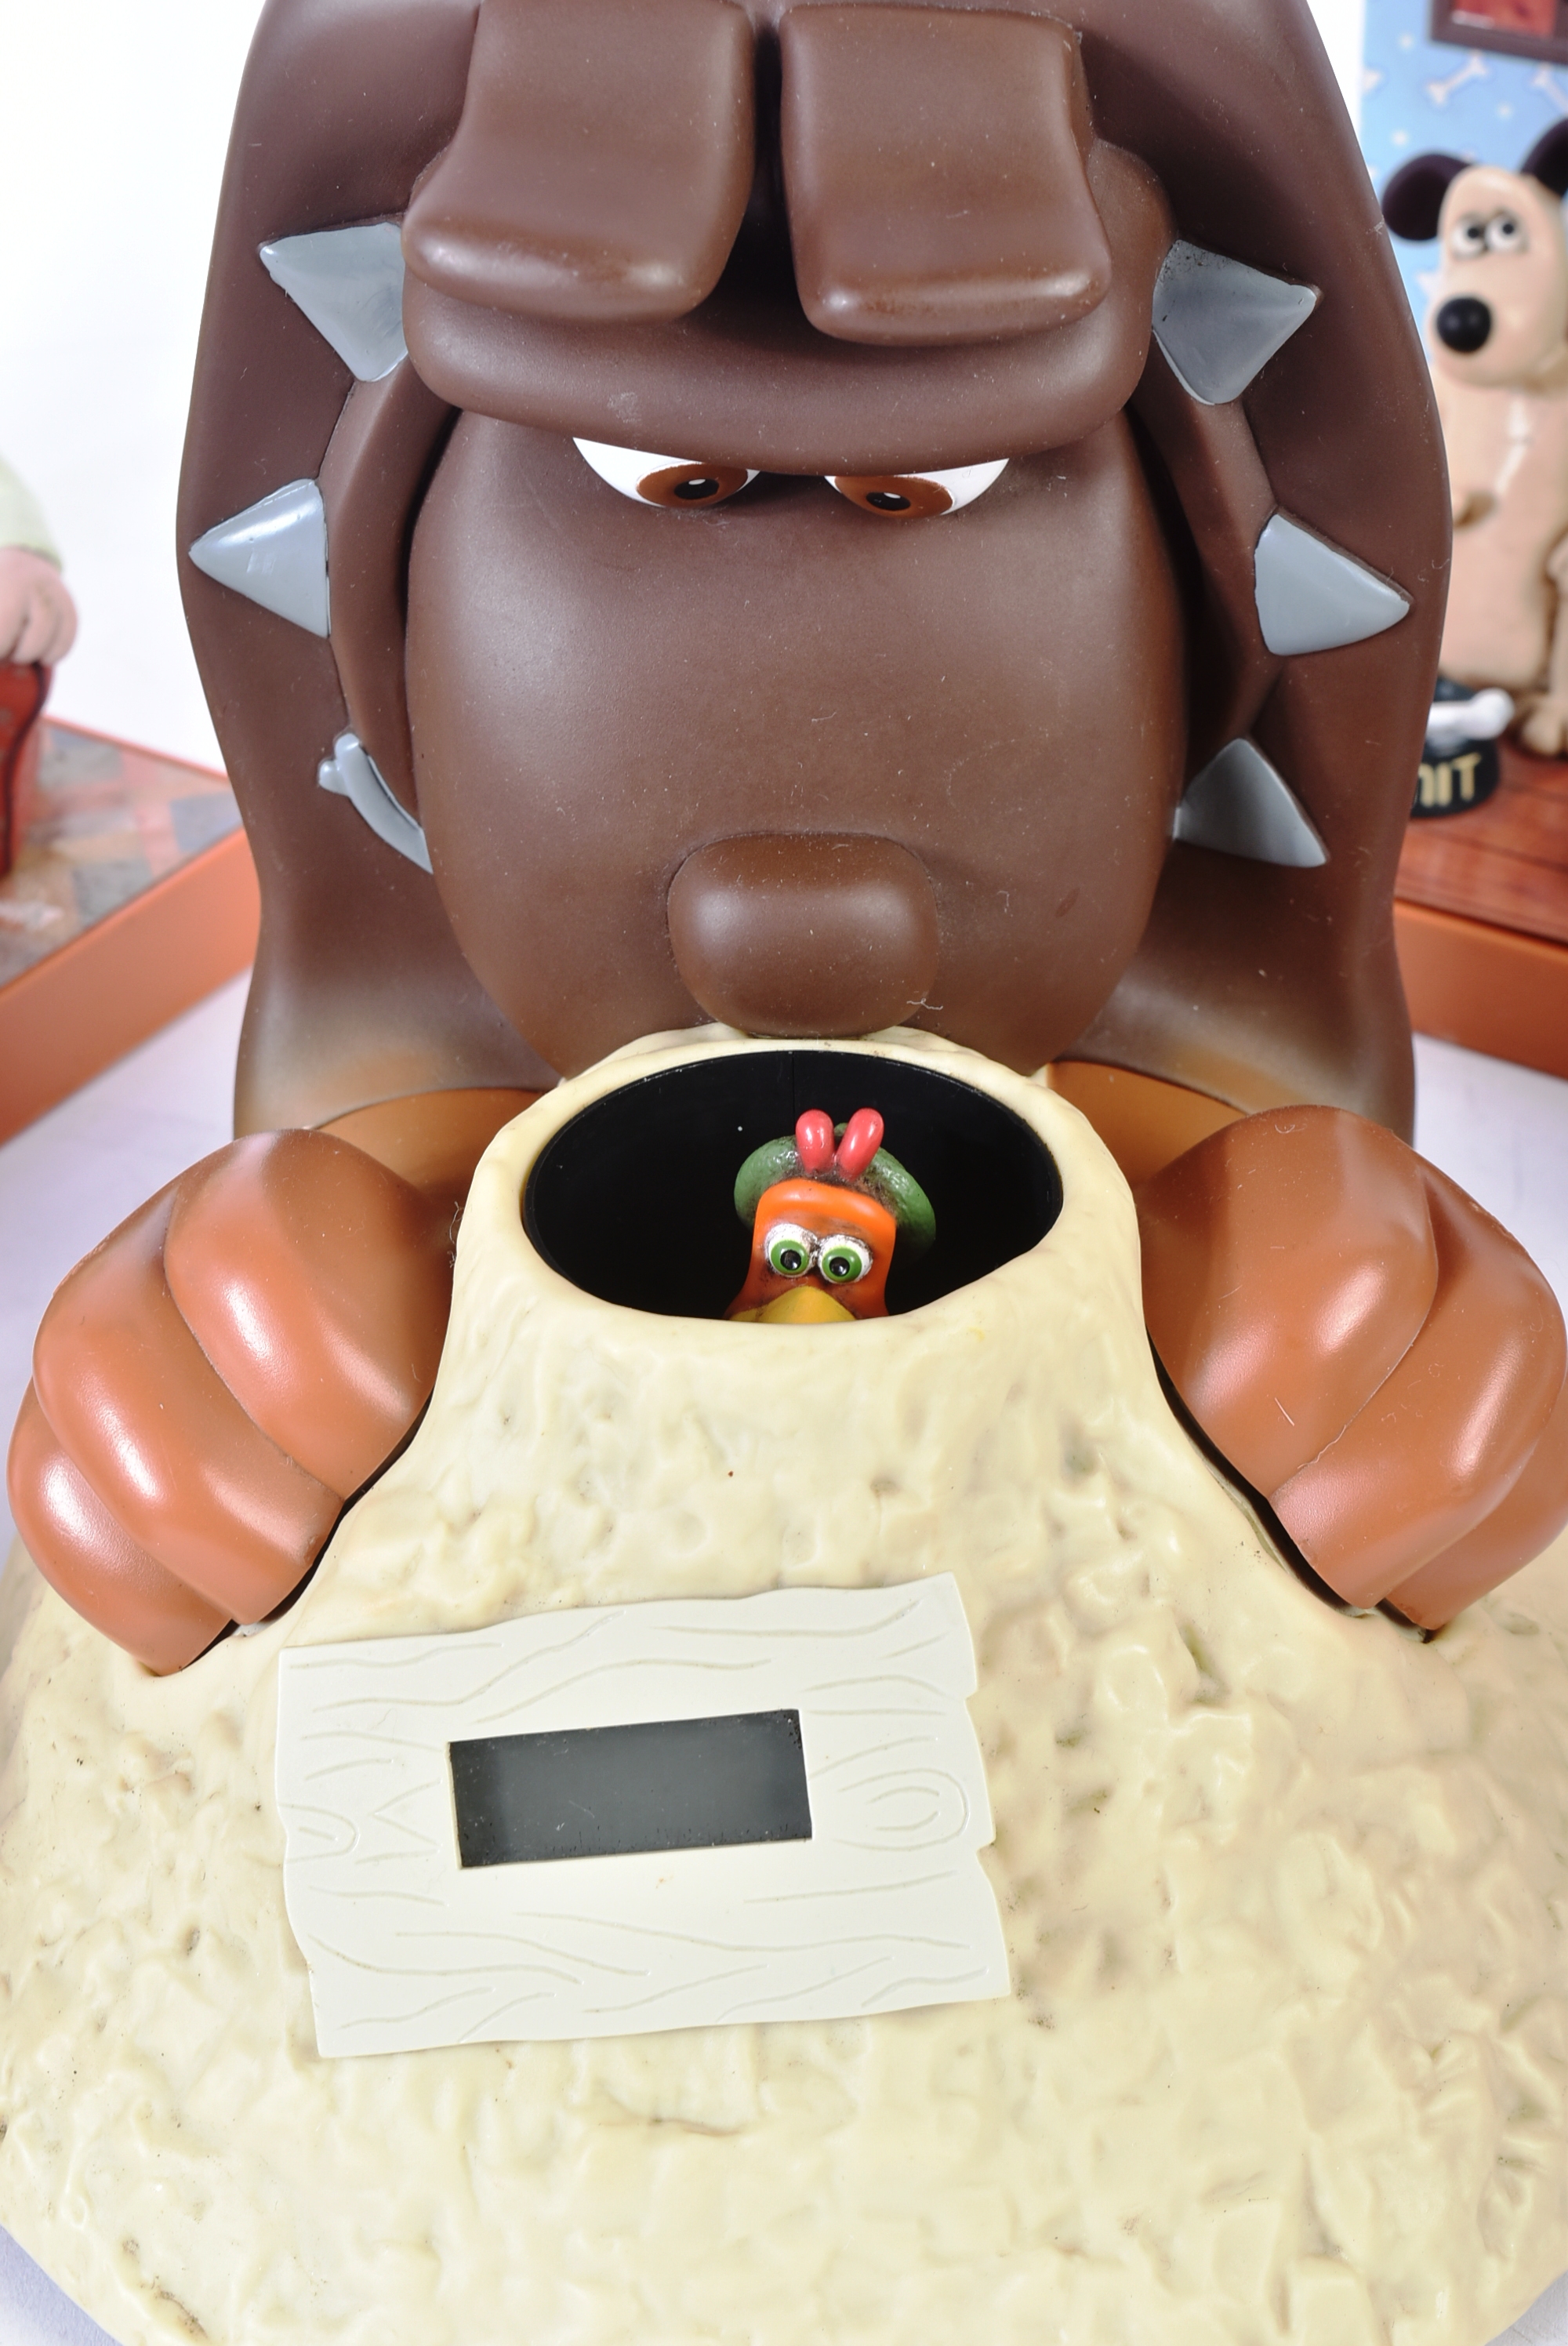 COLLECTION OF WESCO WALLACE & GROMIT DIGITAL ALARM CLOCKS - Image 4 of 5